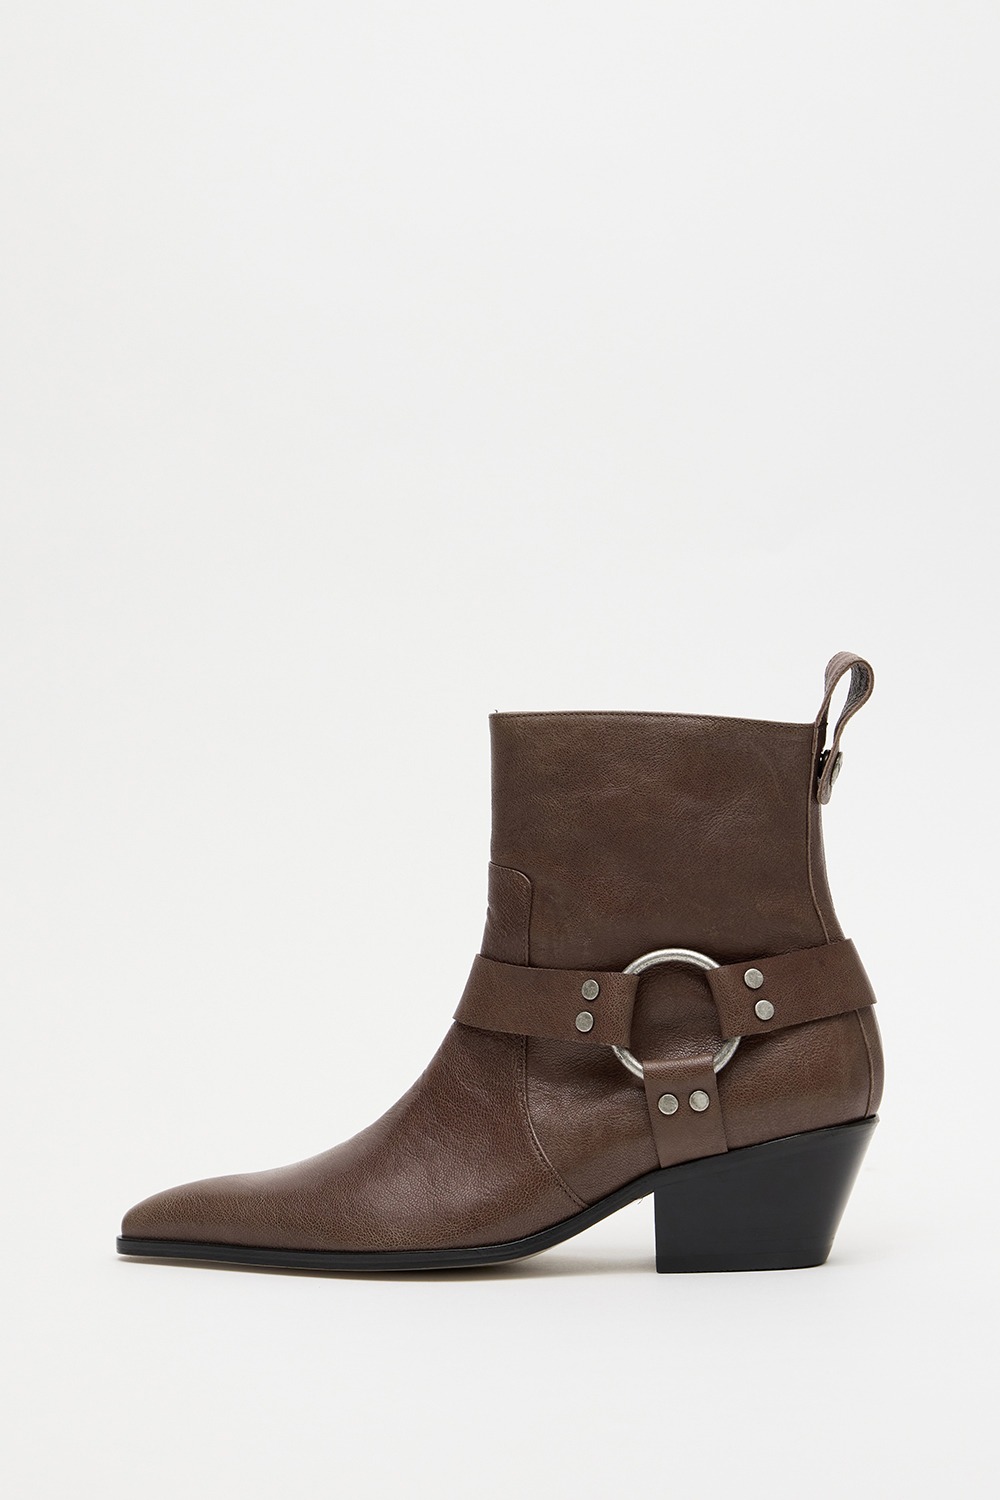 Buckle Western Boots - Brown